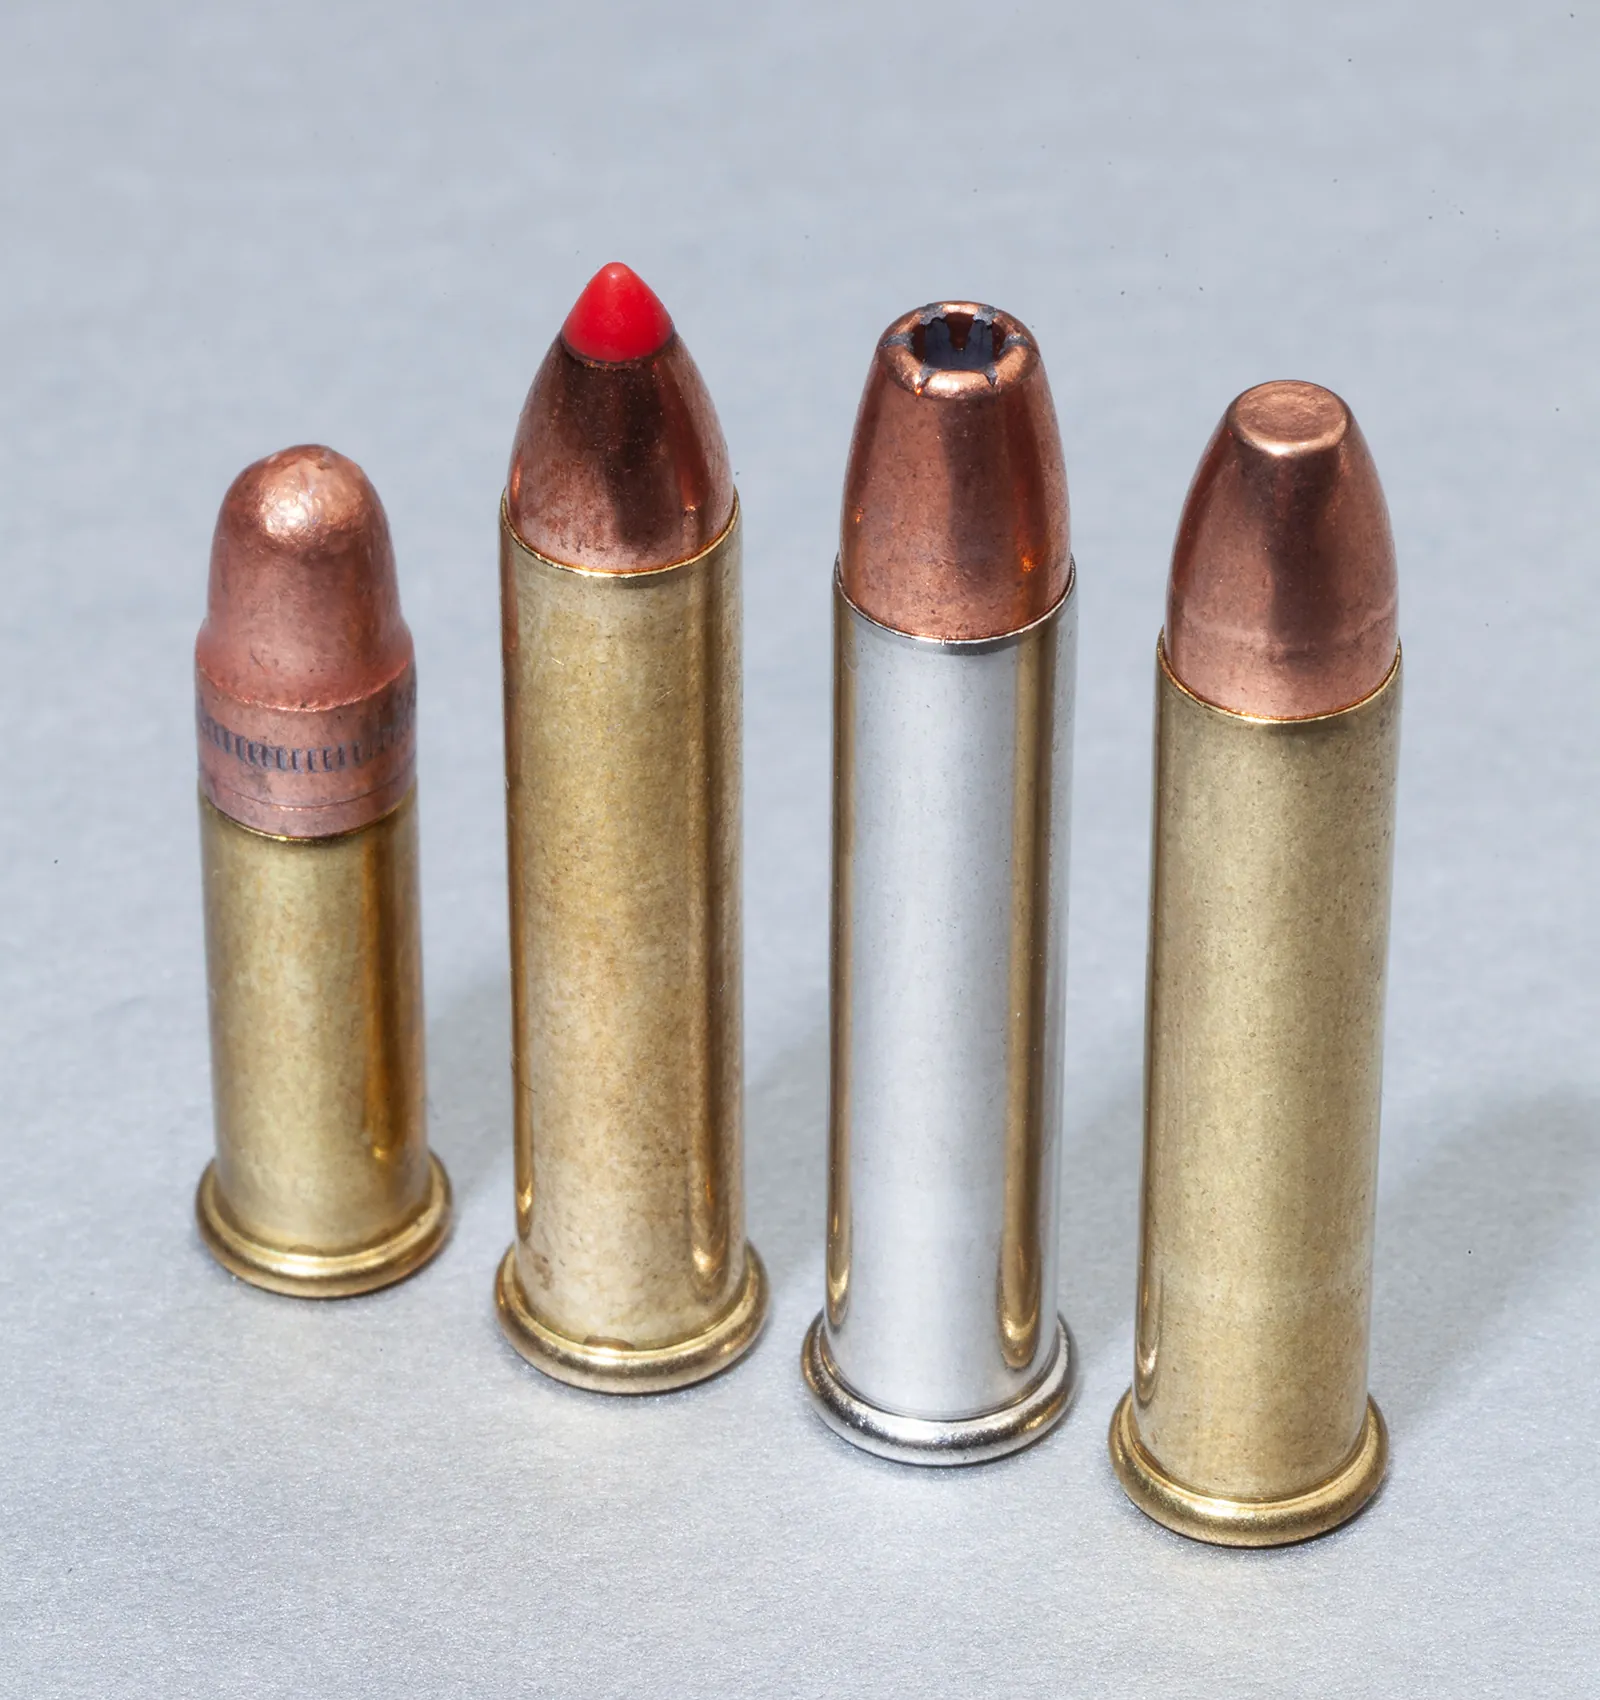 Image showing a size comparison of .22 LR next to three different .22 Magnum cartridges.